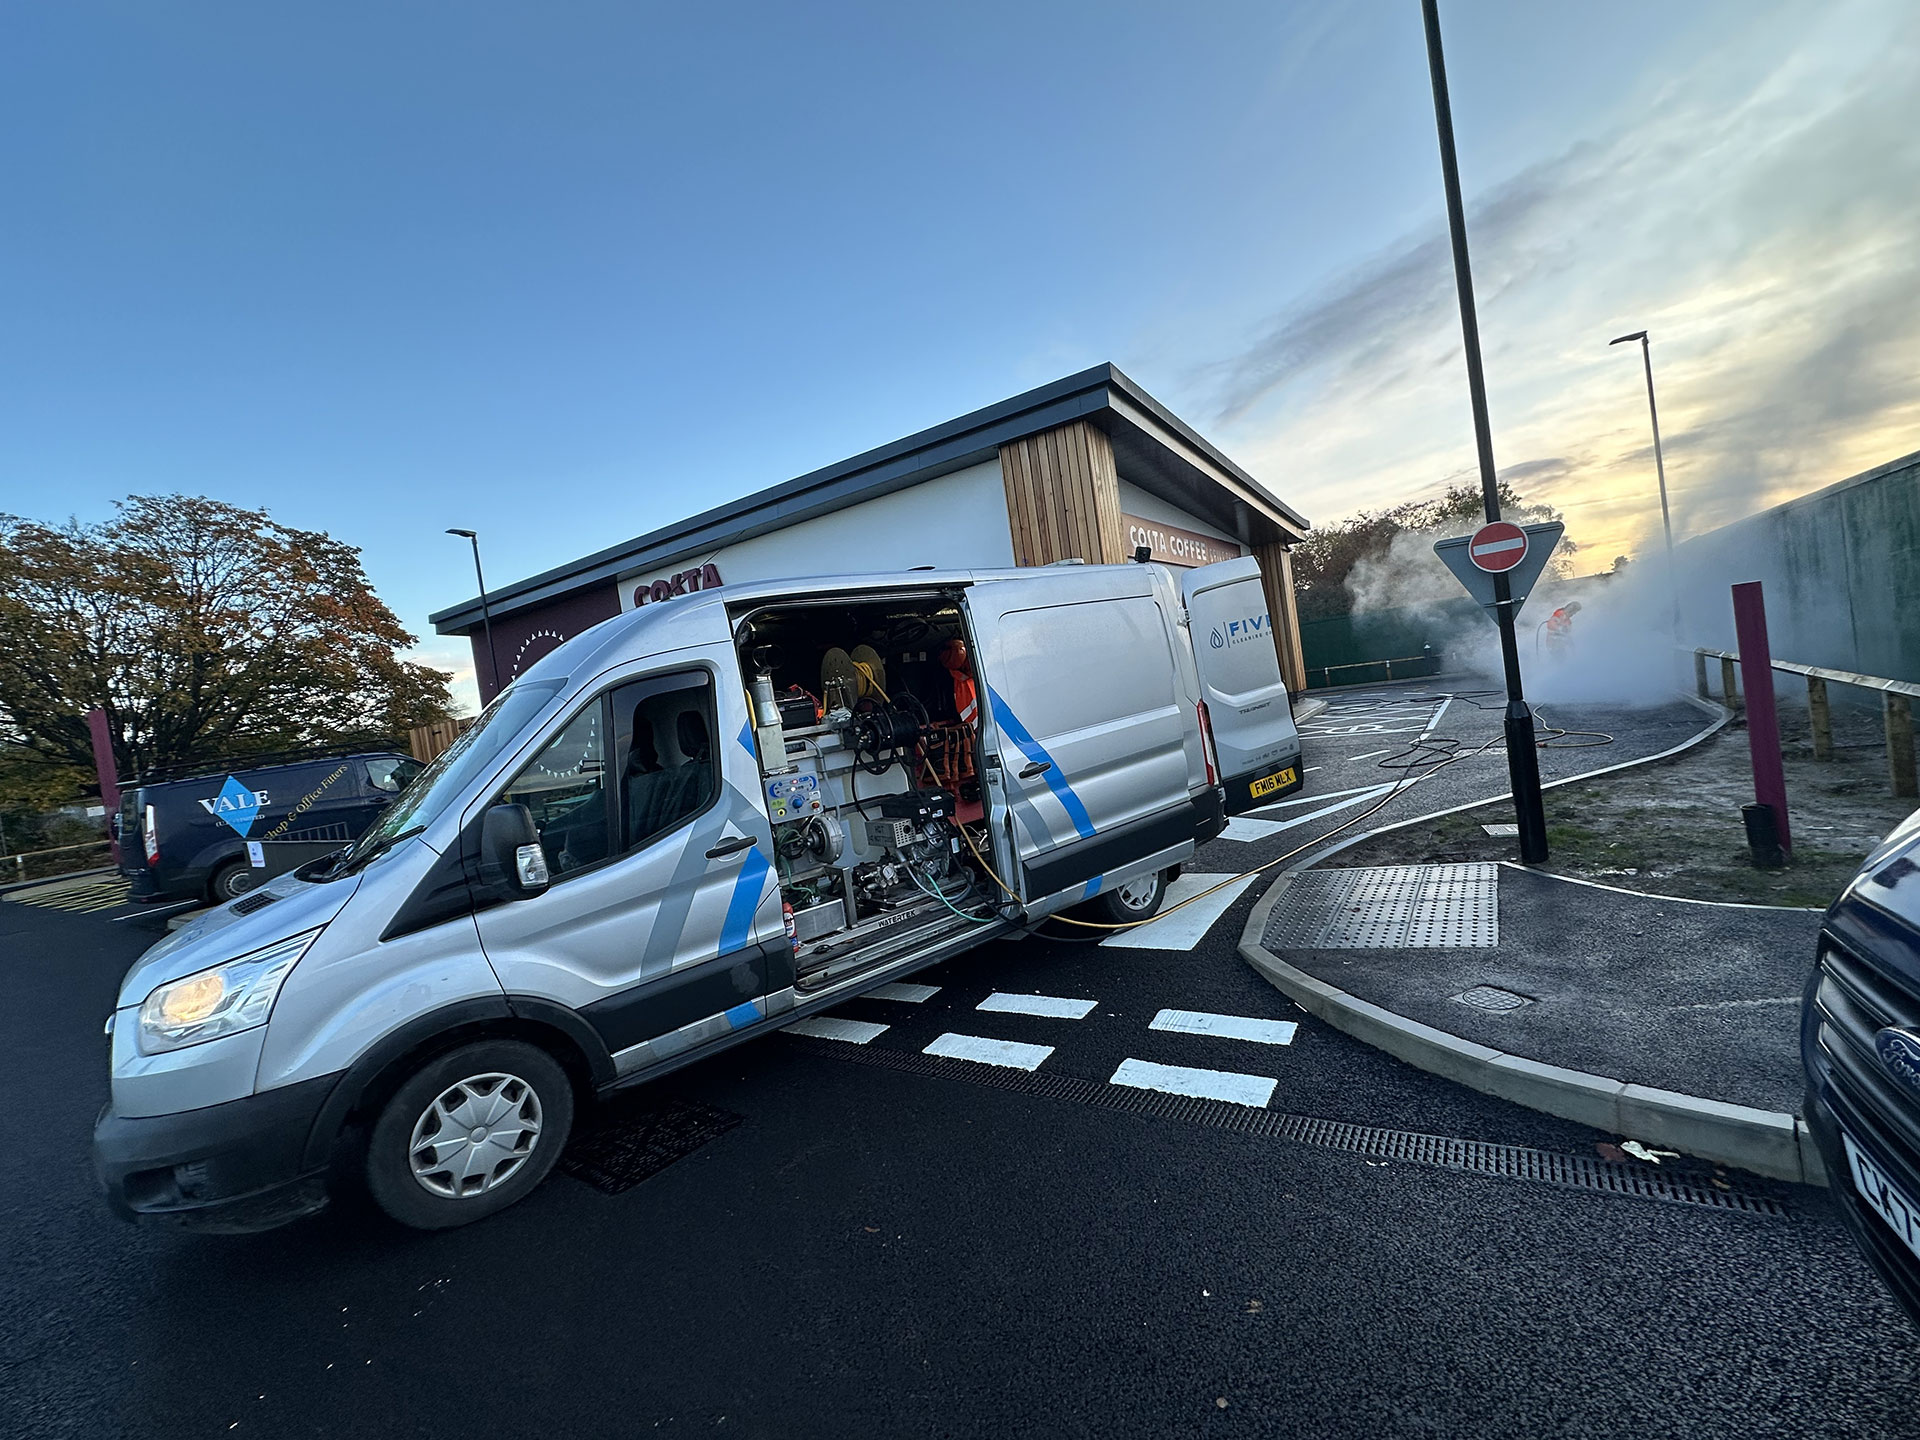 Five Star Cleaning Company van in use